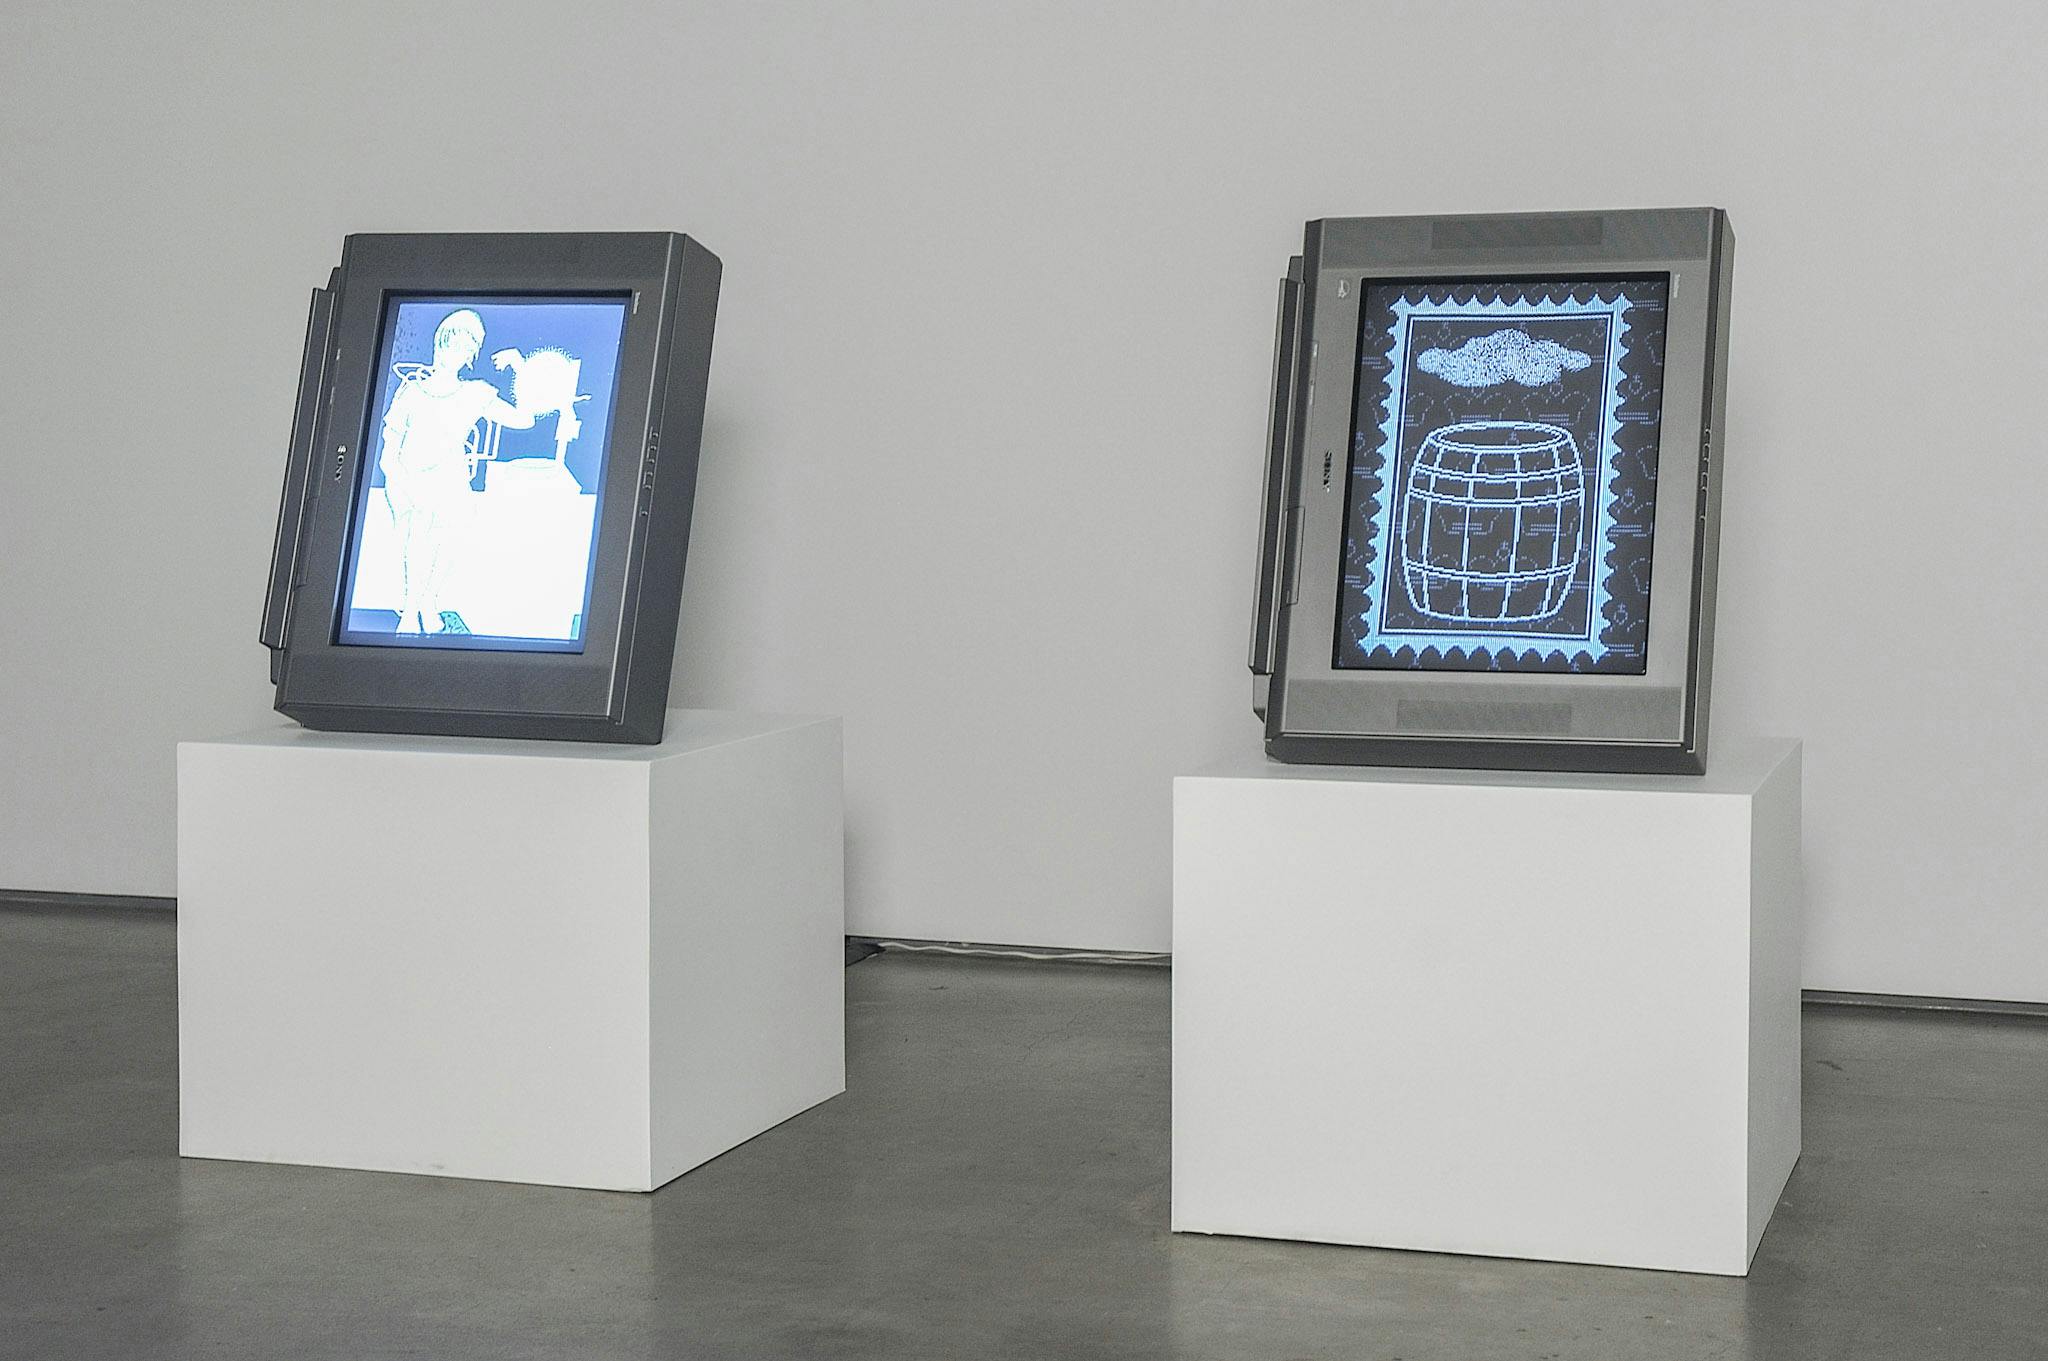 An installation image of two artworks inside a gallery. Two illustrations are displayed on TV screens placed on white pedestals. One illustration shows a person, and the other one shows a barrel and a blue cloud. 